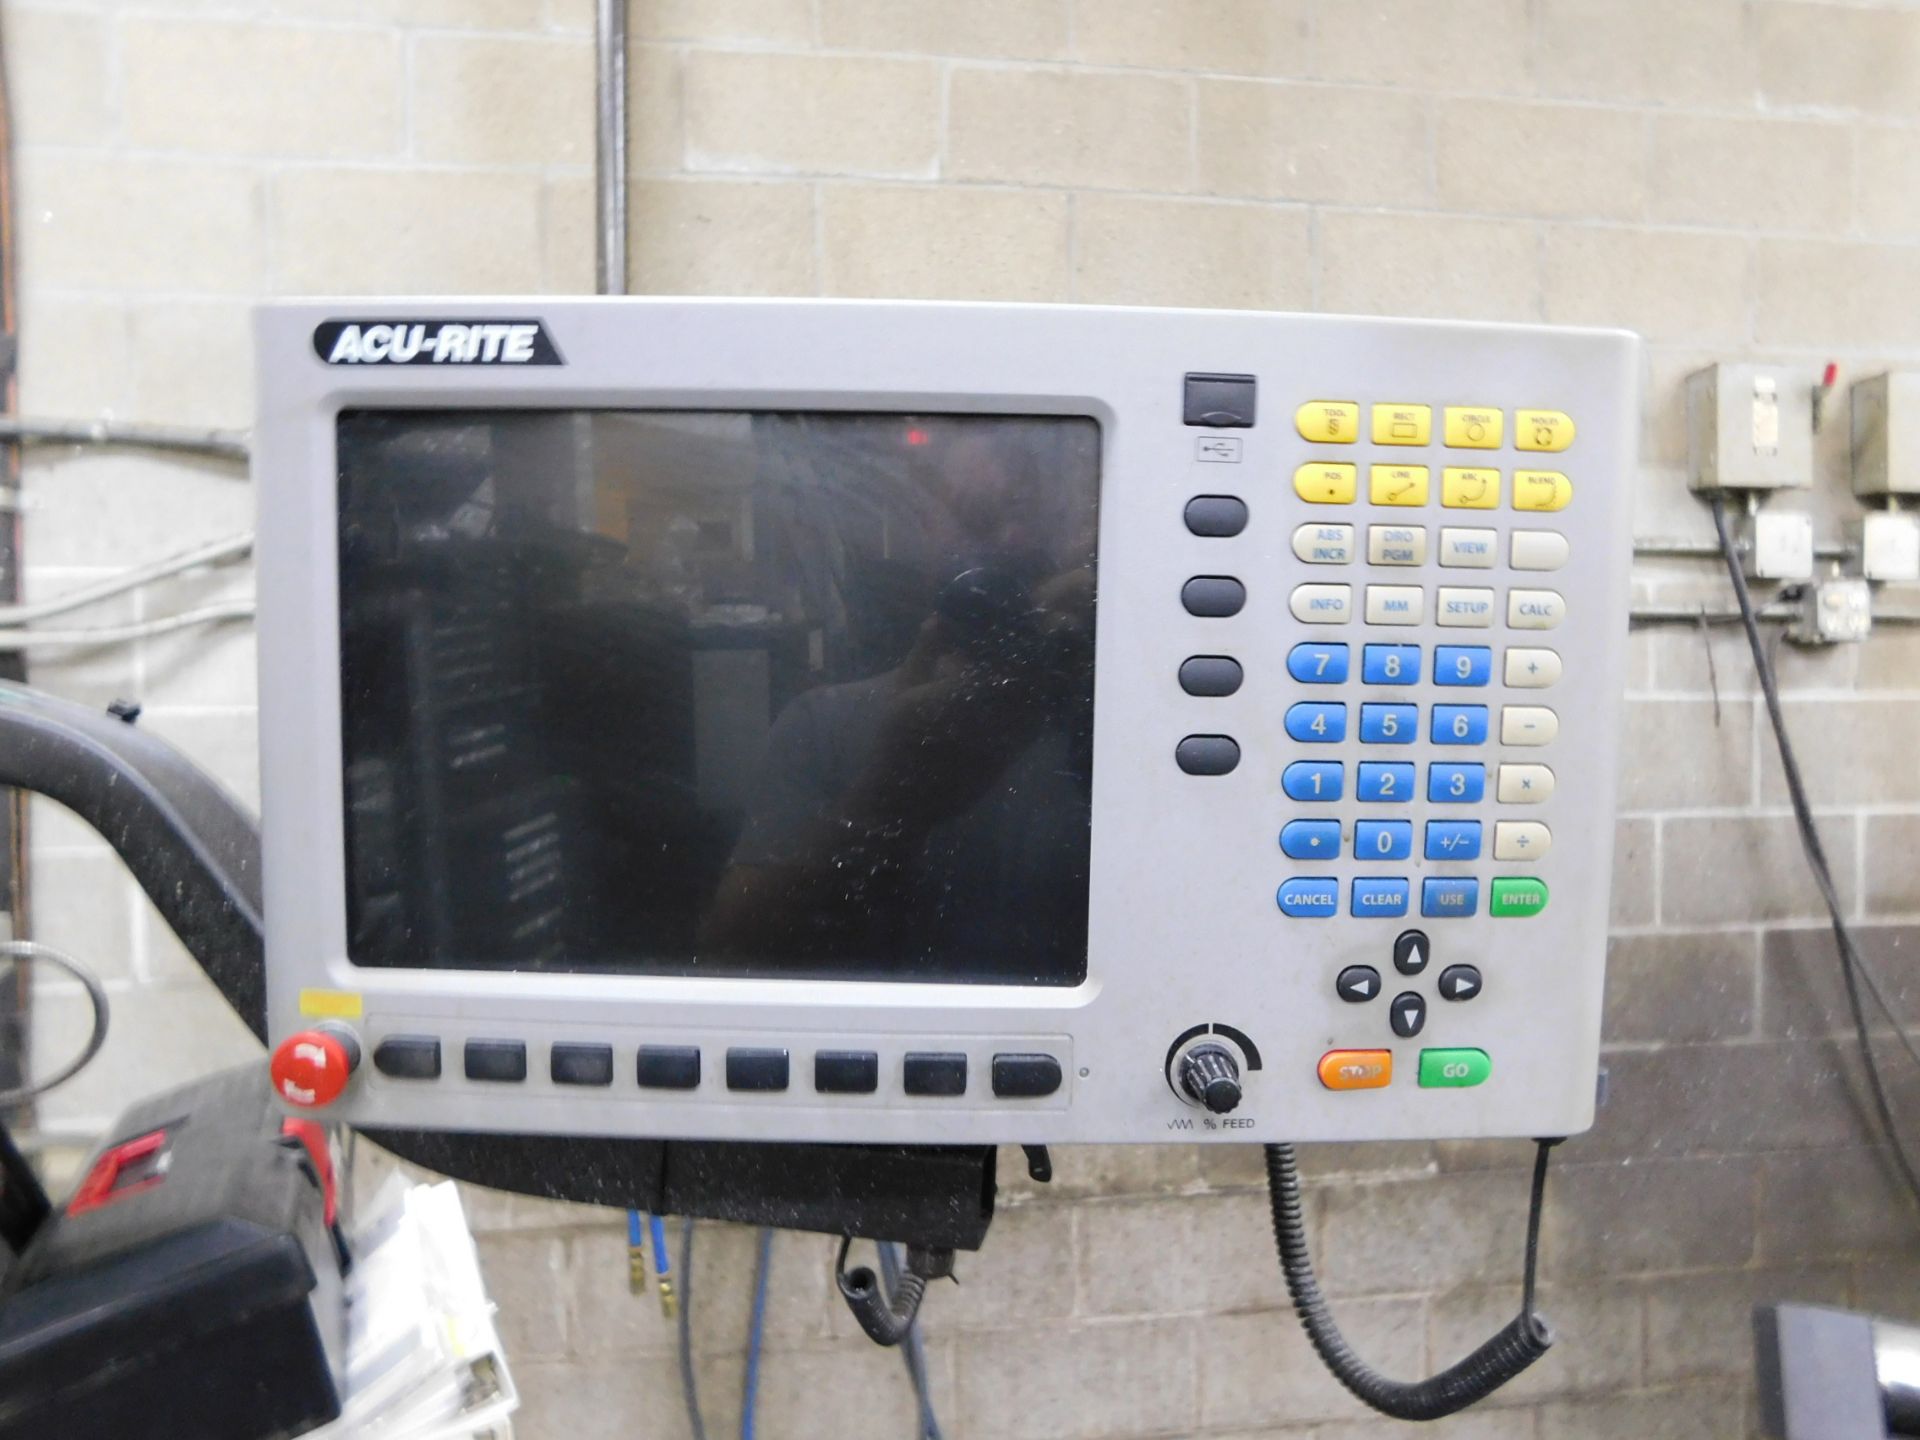 Kent USA Model KTM-4VK, 2-Axis CNC Vertical Mill, s/n 10413122, New 2015, Accu-Rite Mill Power CNC - Image 6 of 7